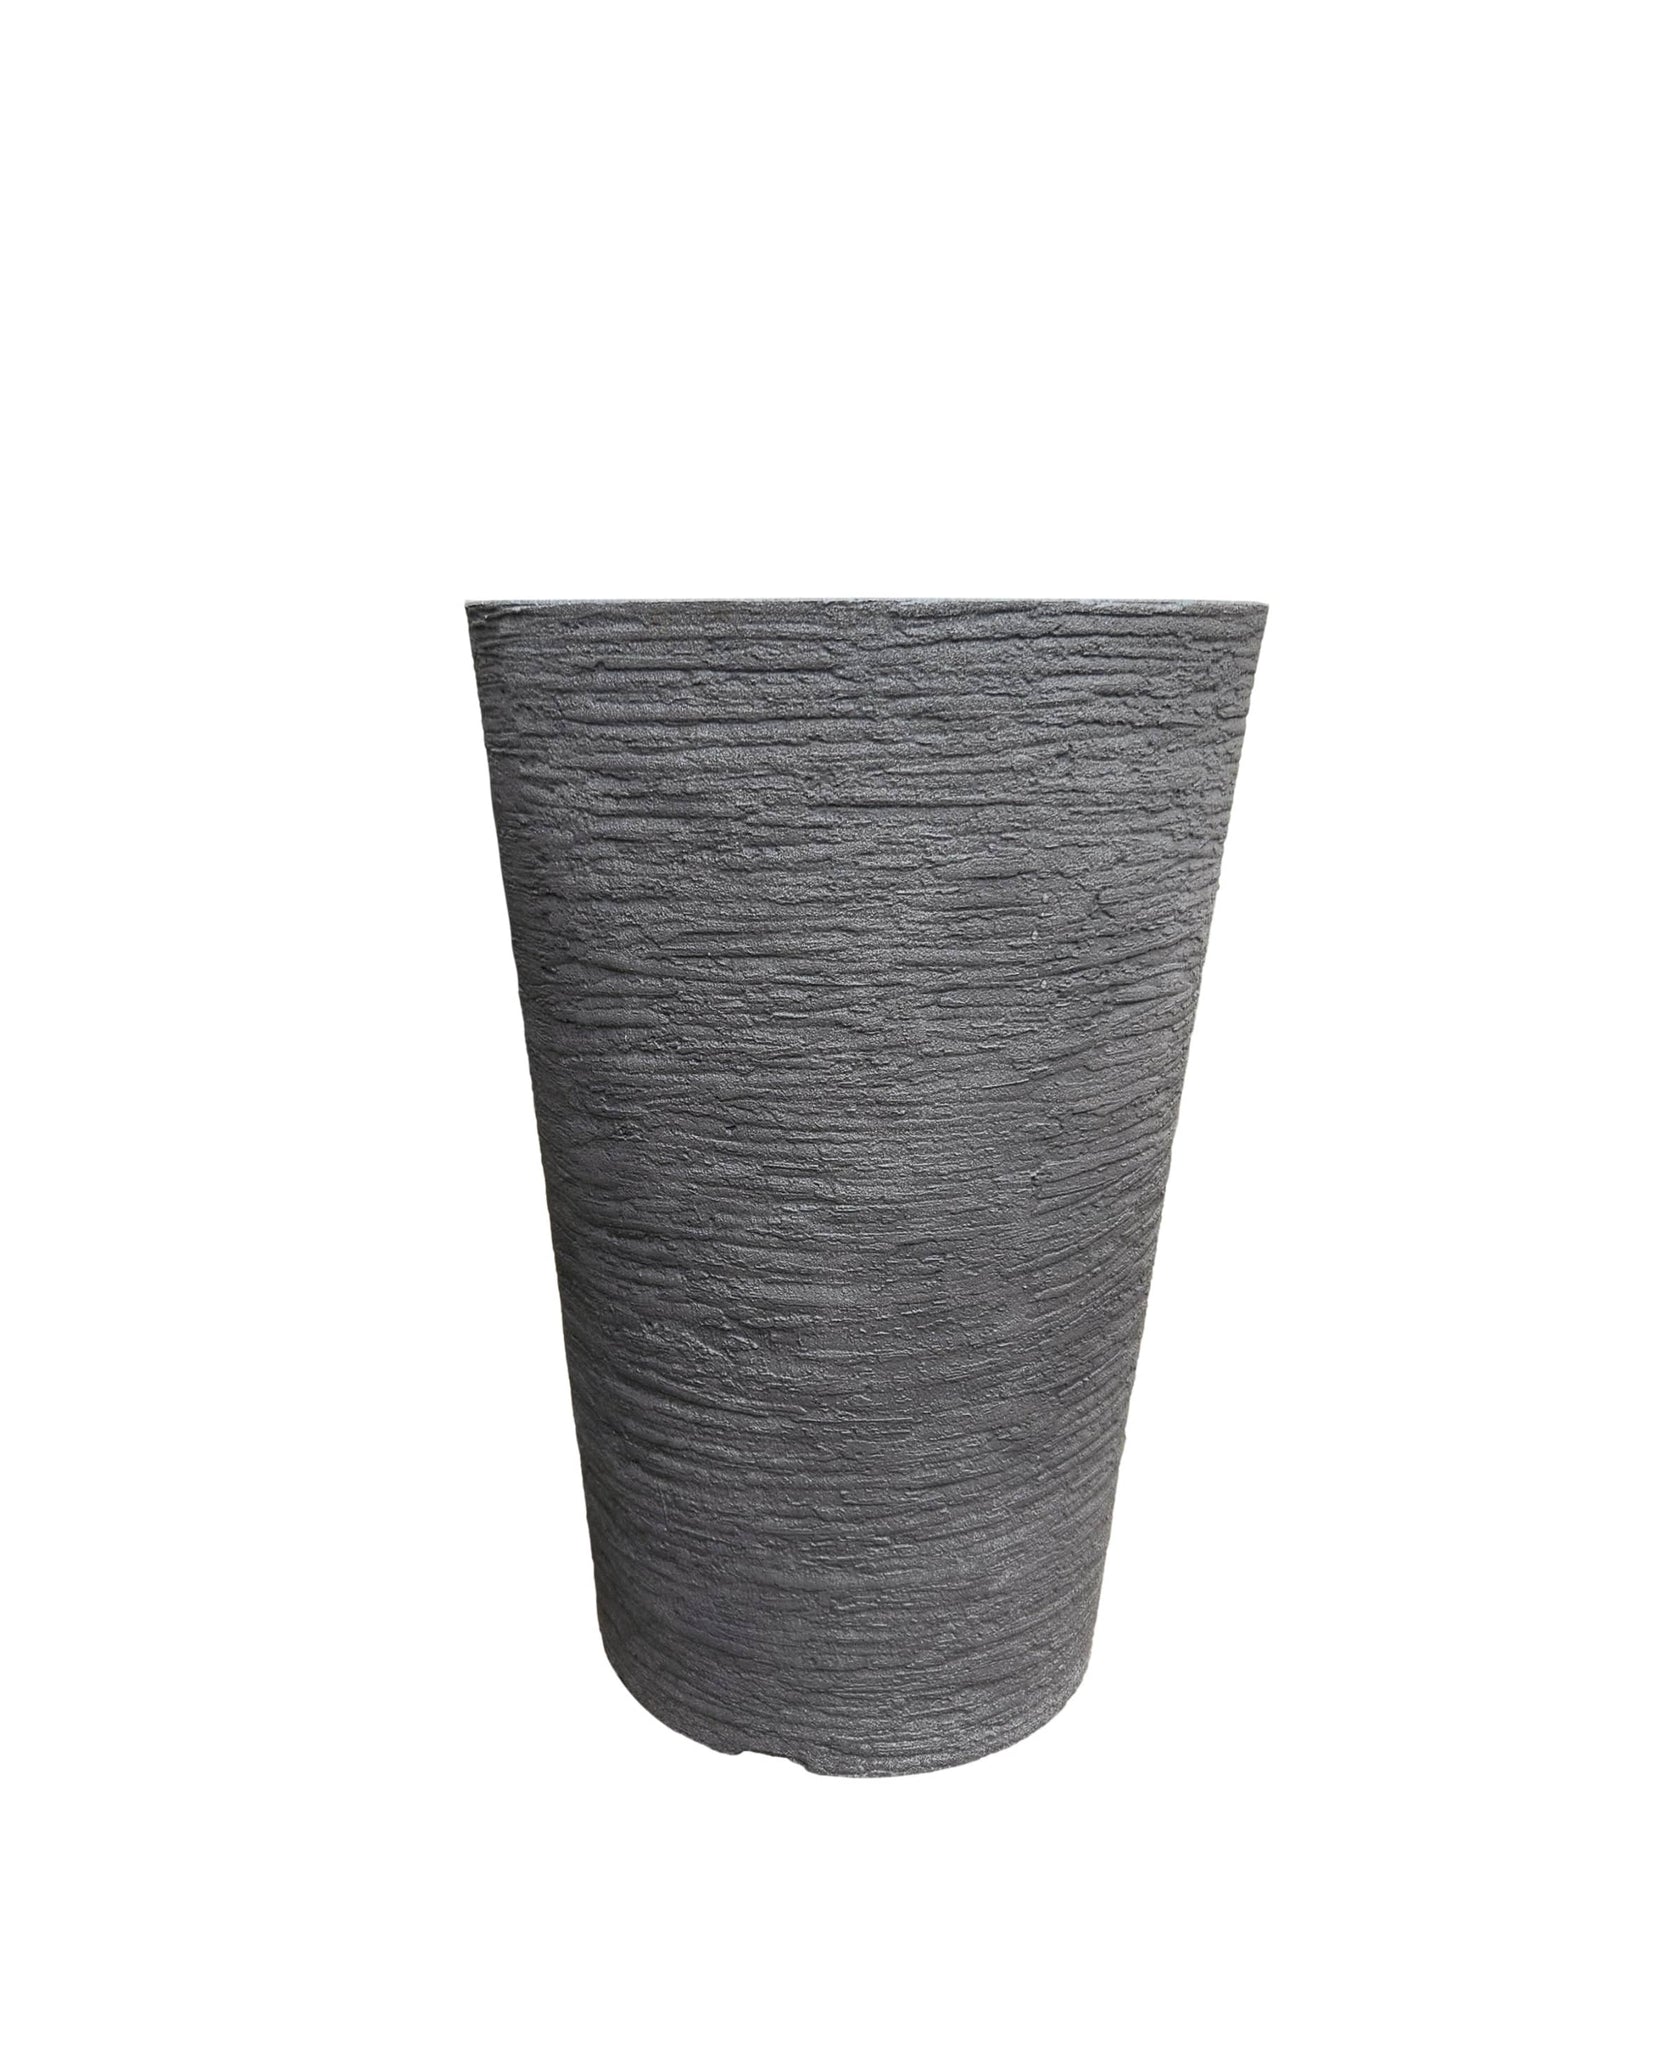 Small upright European conic Japi planter in the colour Black Slate. Textured finish. Modern planter suitable for any style of decor. 